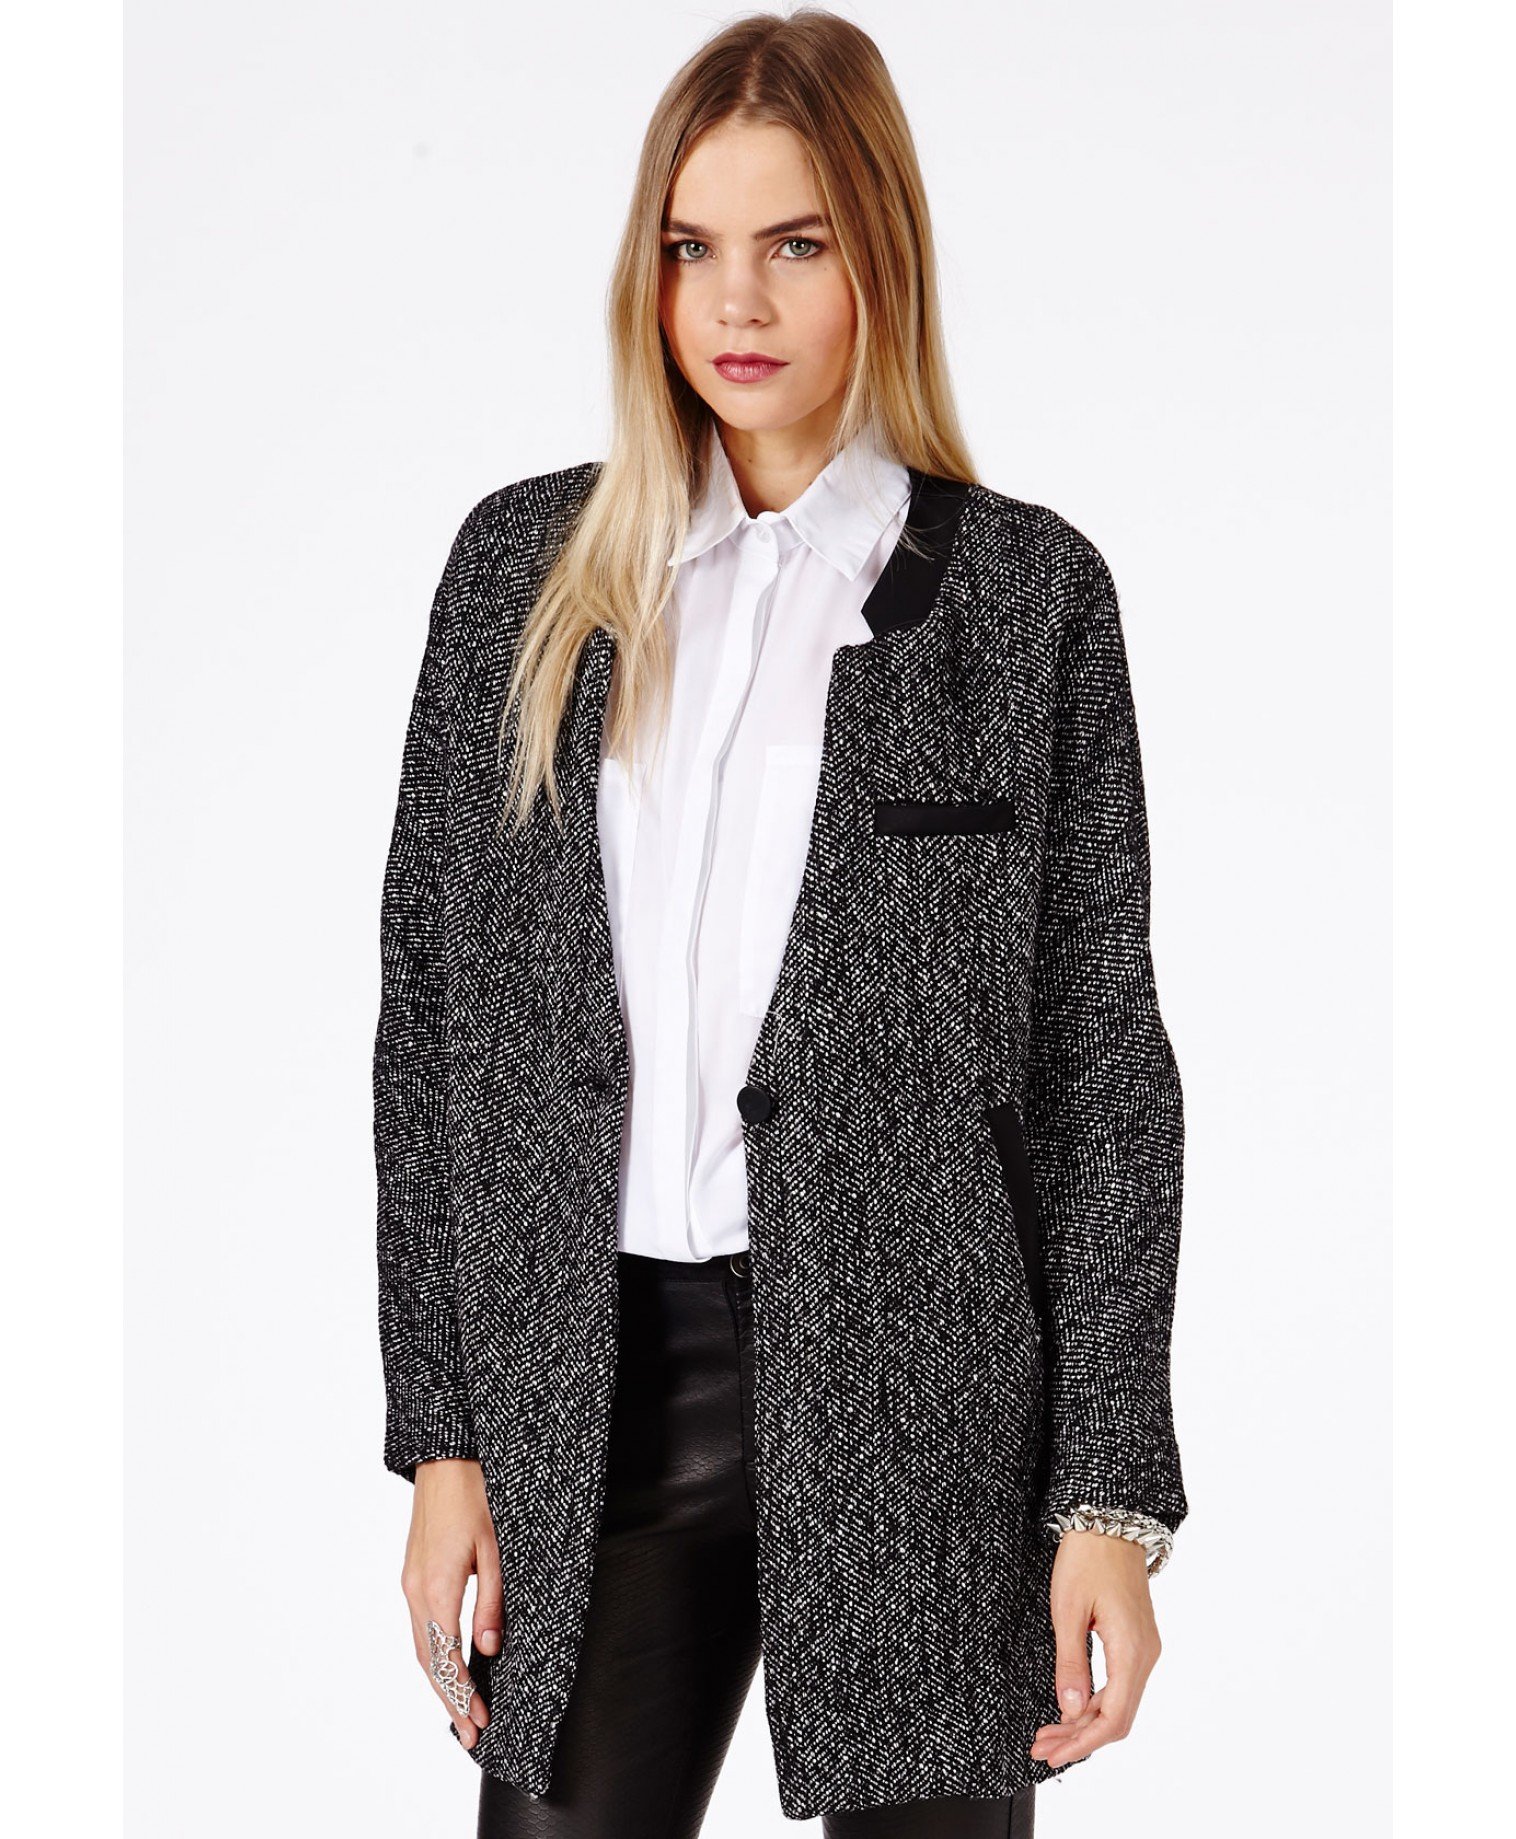 Missguided Petera Tweed Boyfriend Coat with Faux Leather Trim in